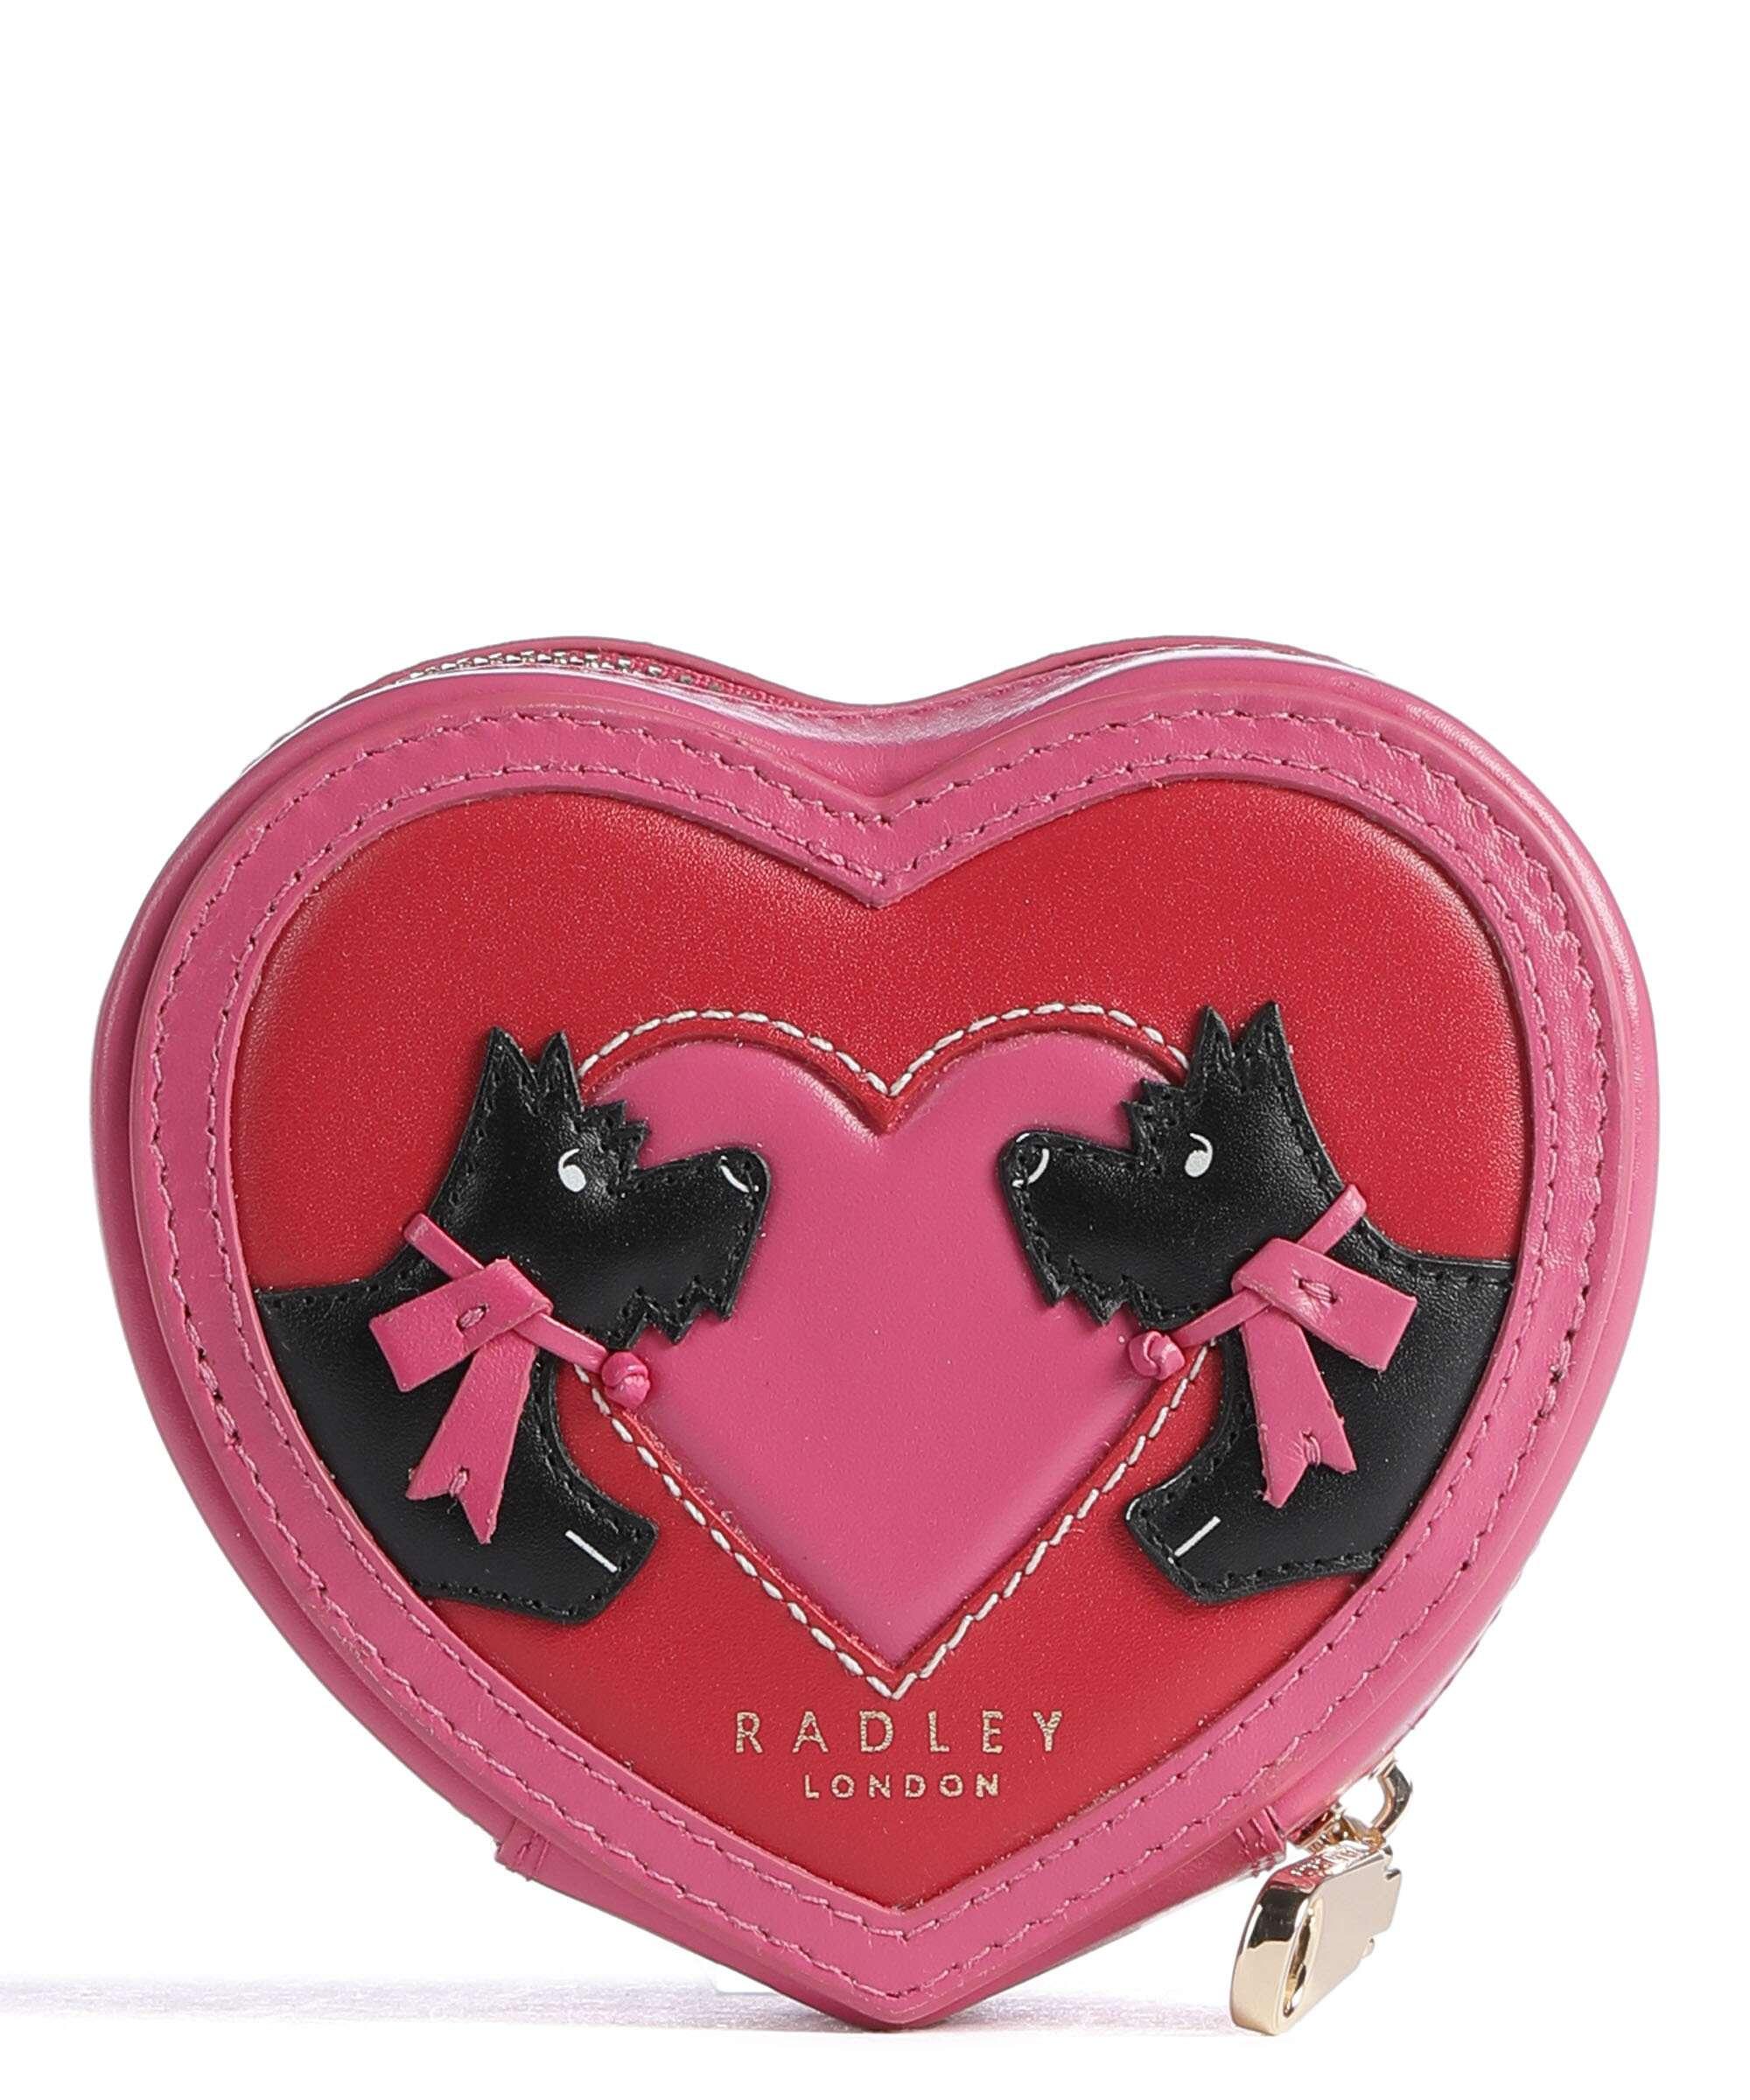 RADLEY PINK LEATHER MATINEE PURSE WALLET LARGE NEW!!! | eBay